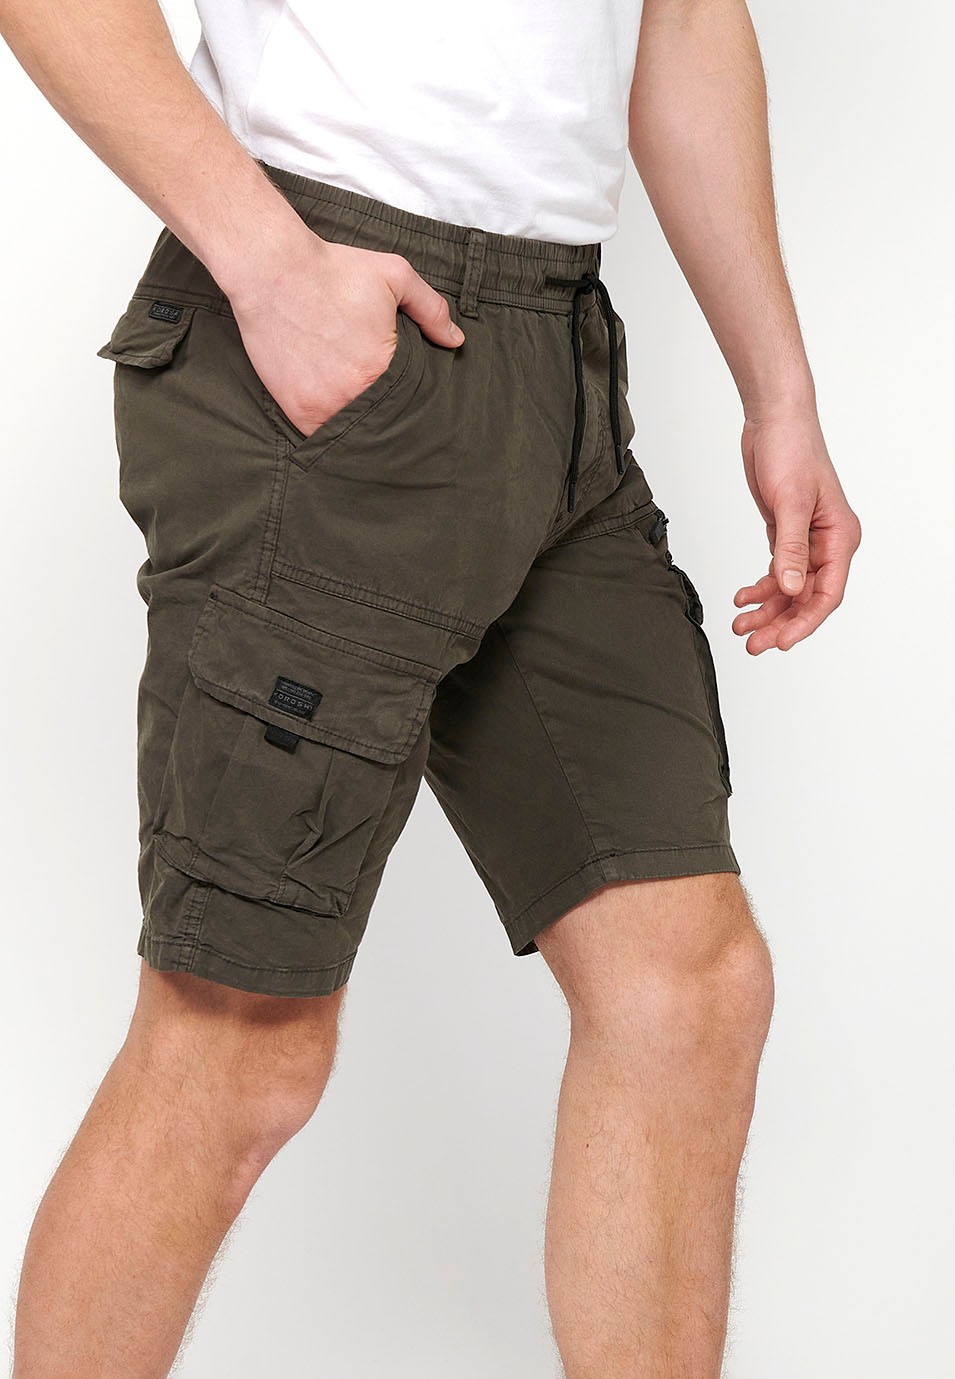 Cargo shorts with side pockets with flap and front closure with zipper and button in Olive Color for Men